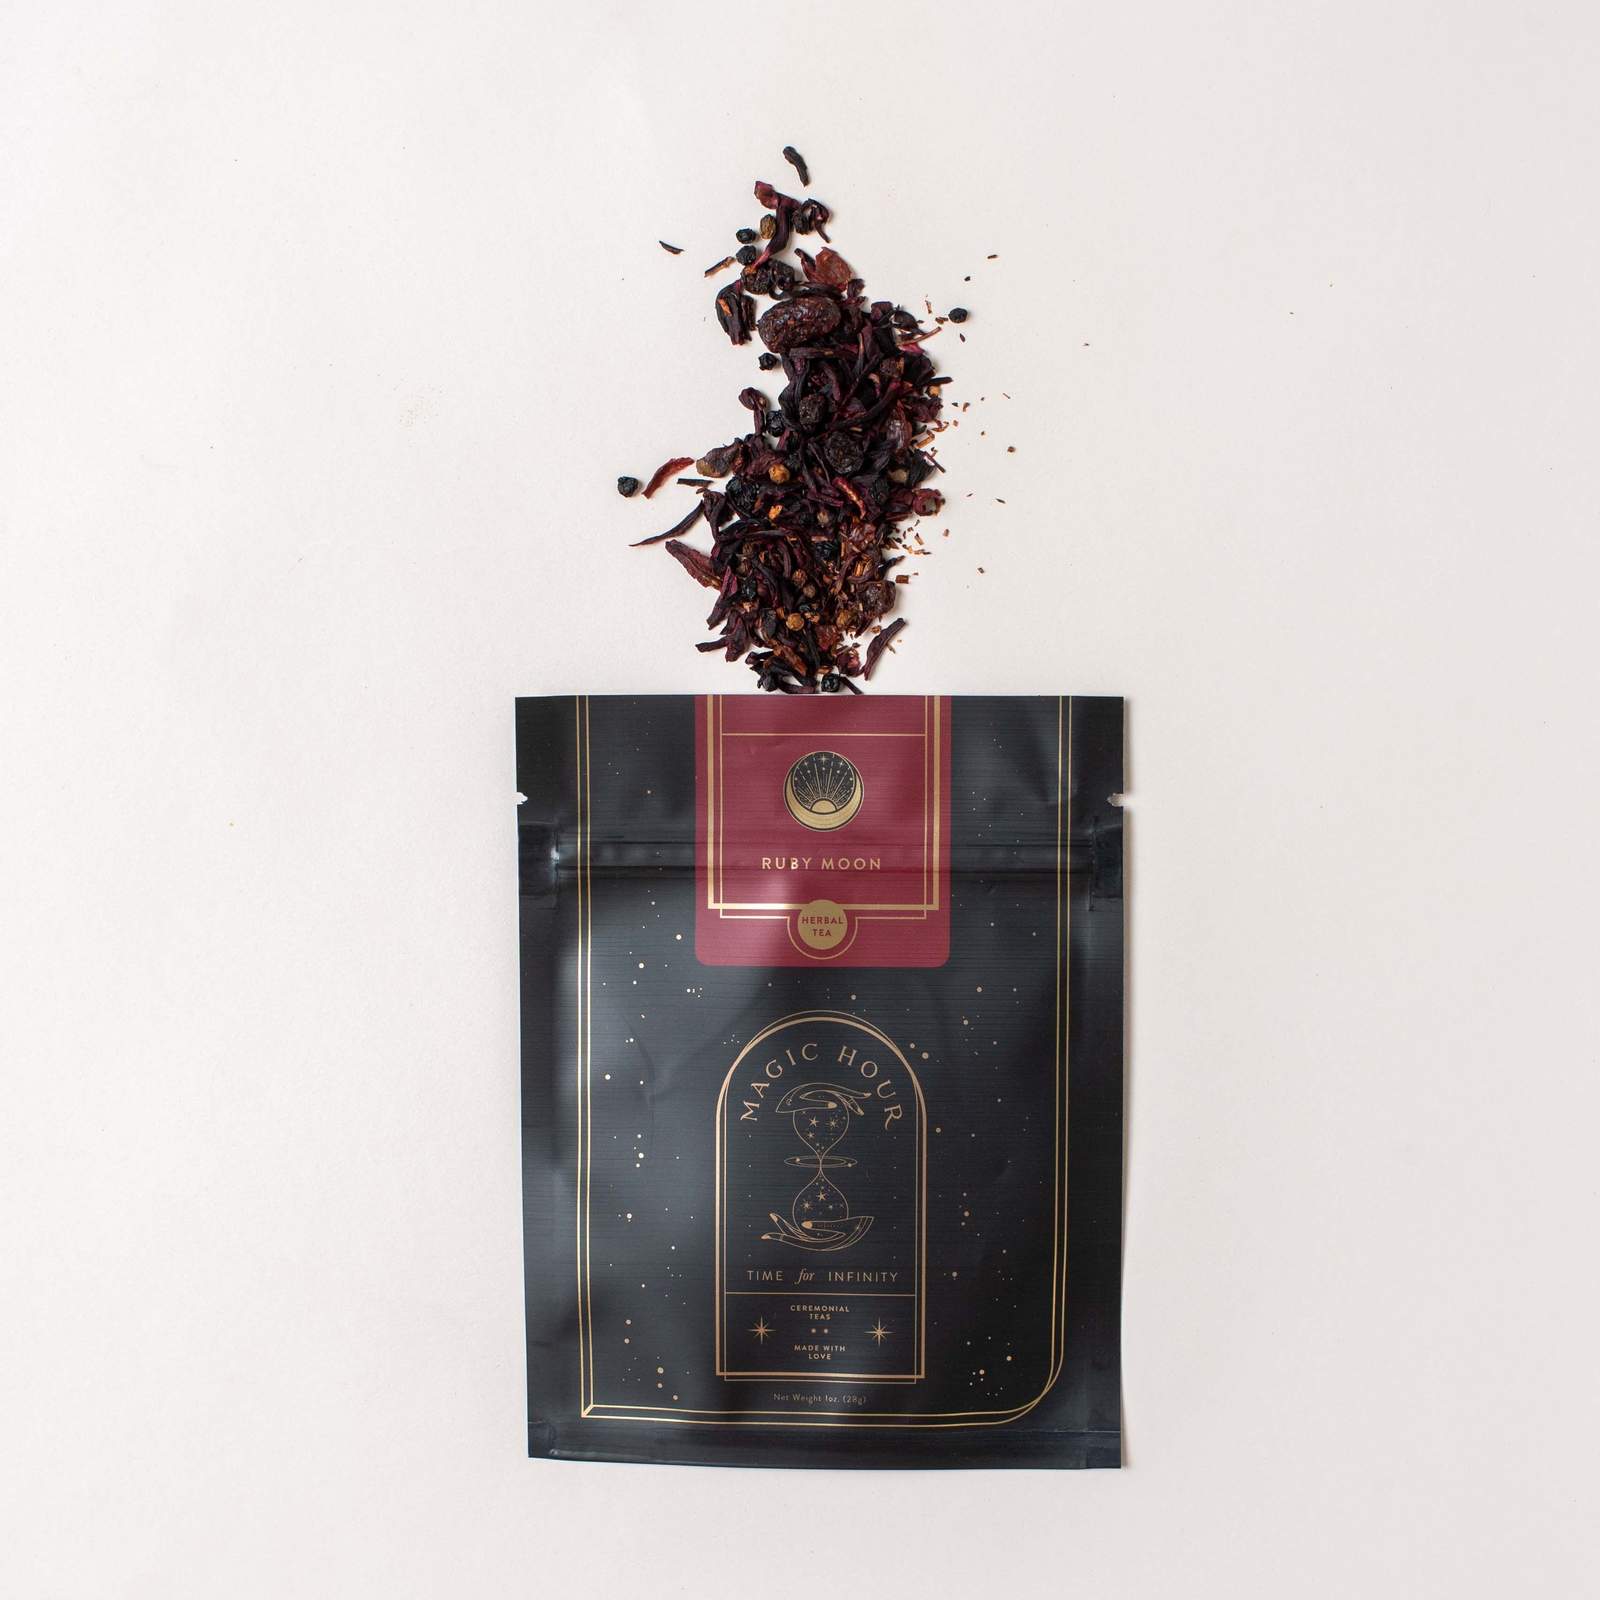 A black and gold package labeled "Magic Hour" with a red section labeled "Moon Lover: Herbal Immunitea Ritual Gift" is open at the top, spilling its organic loose leaf tea onto a white background. The dark tea leaves display a rich mix of red and brown hues.